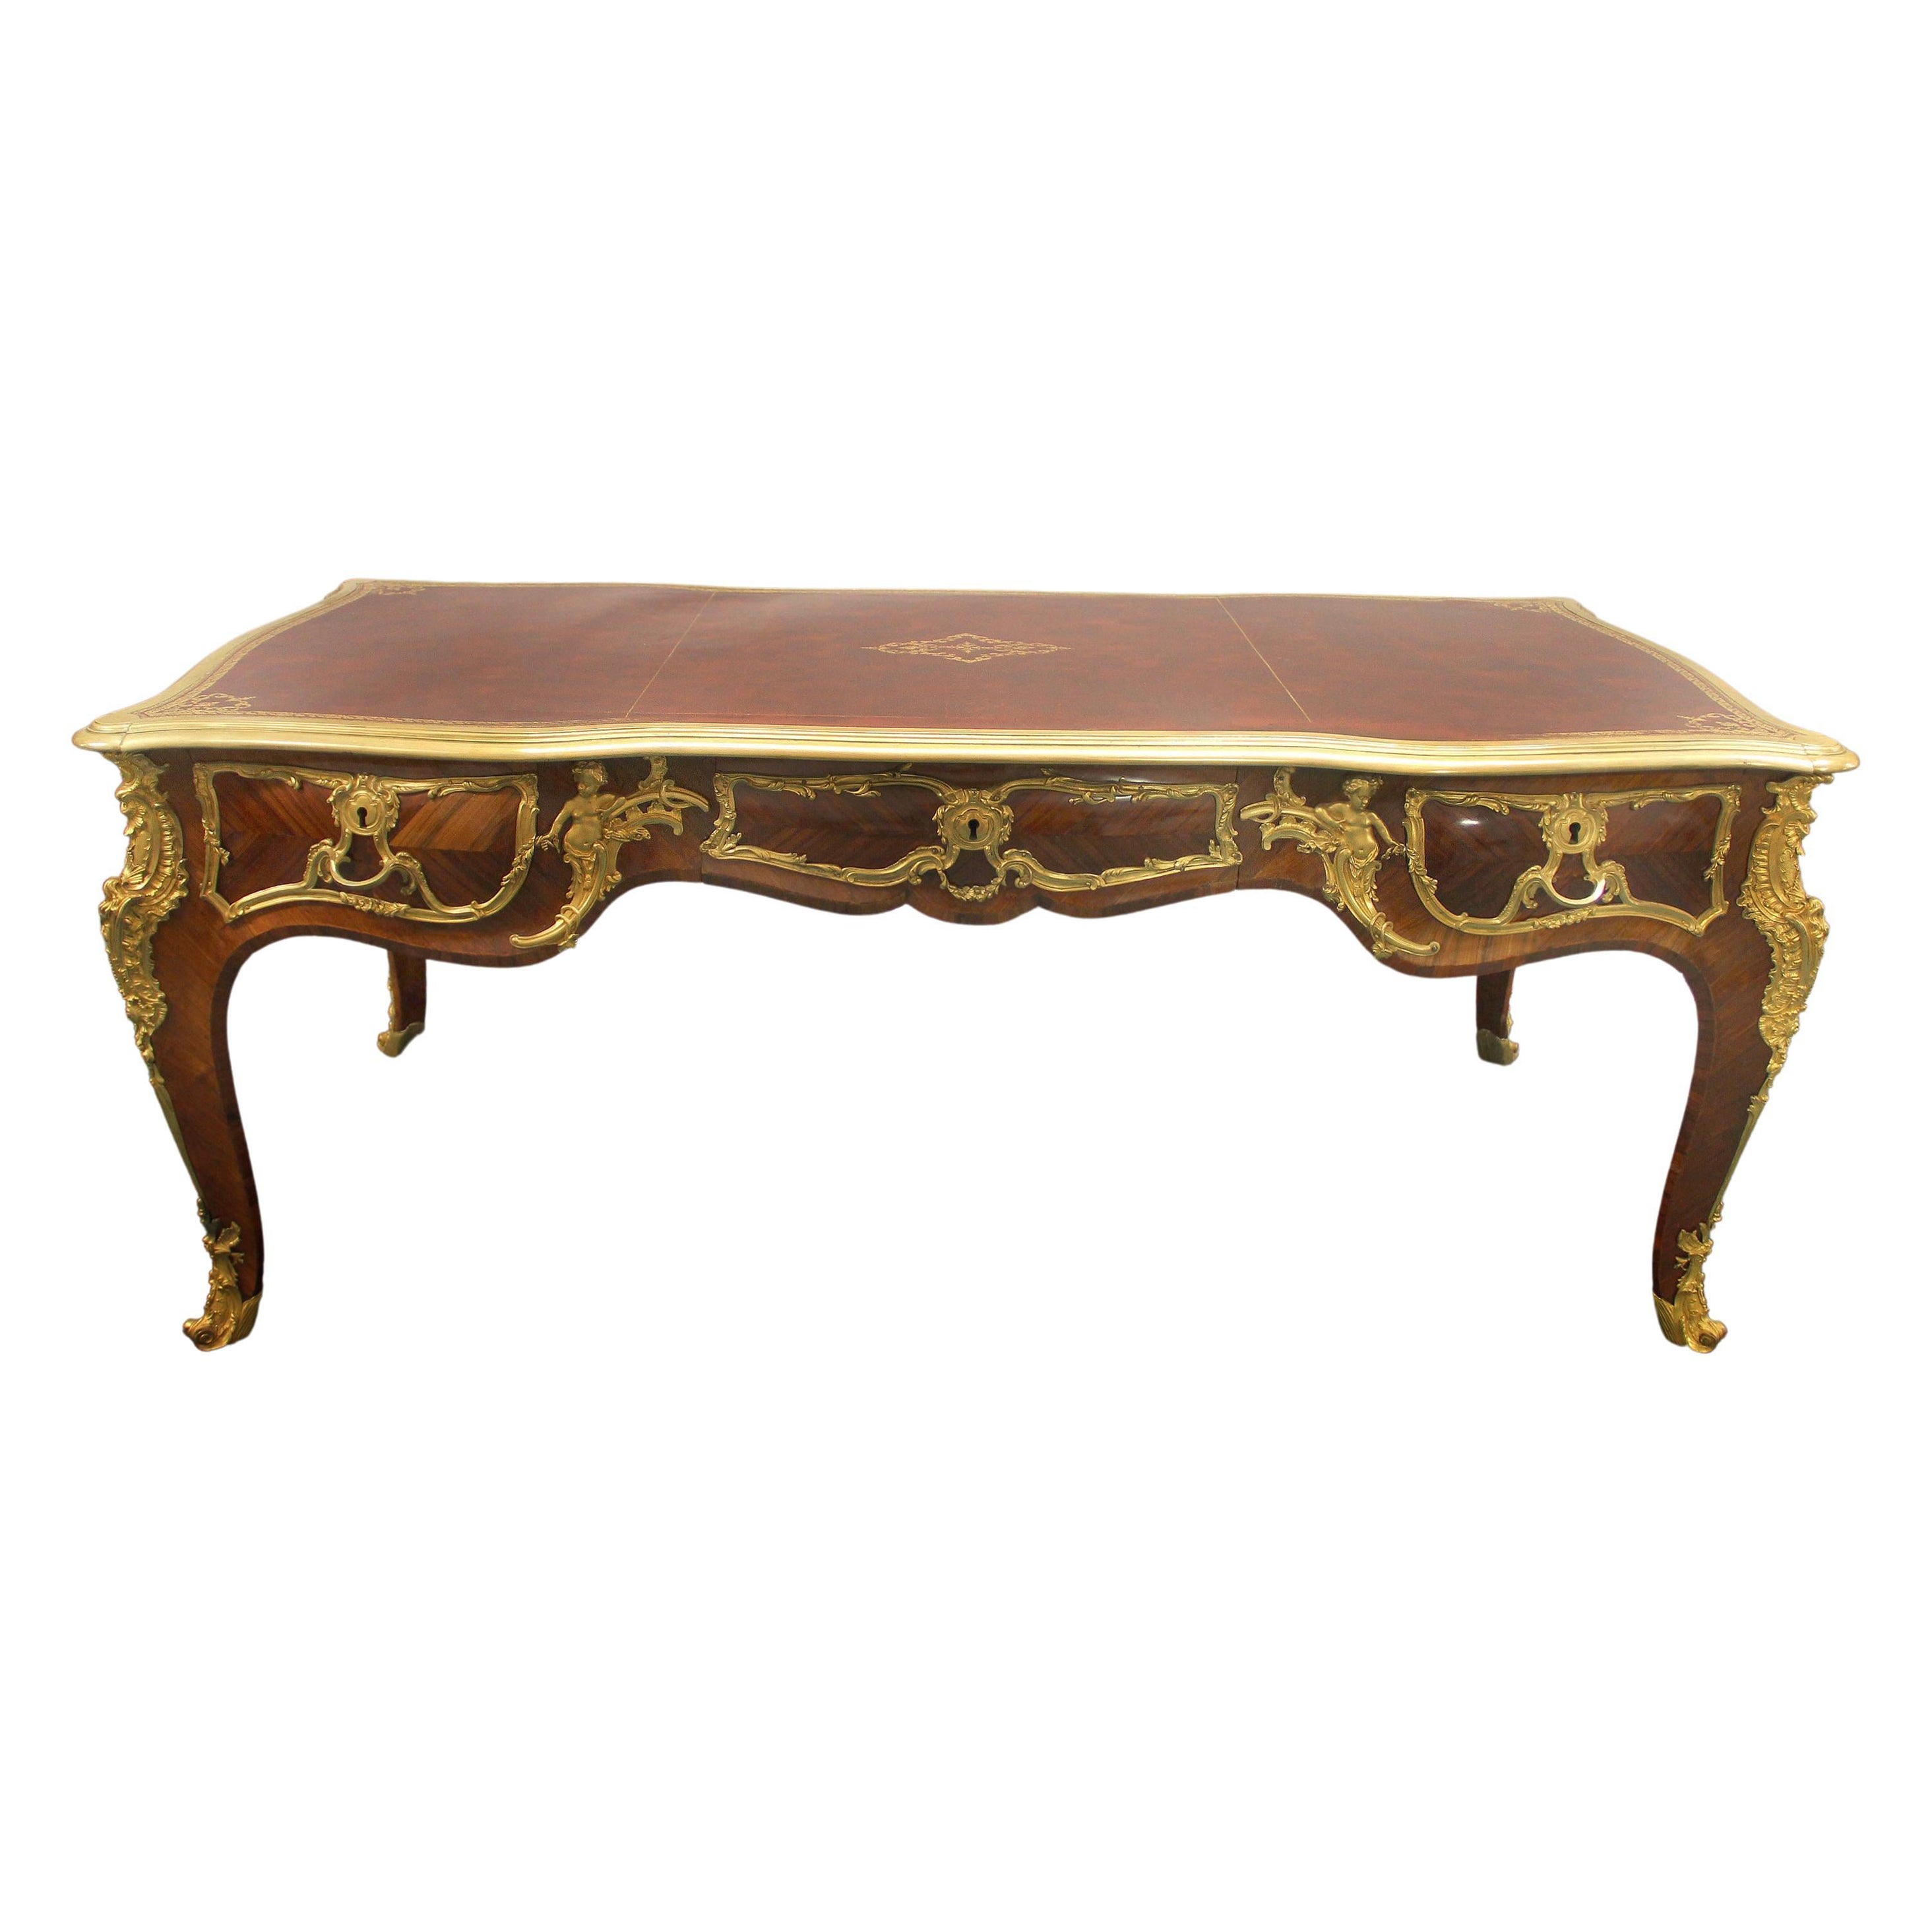 Rare Late 19th Century Gilt Bronze Mounted Bureau Plat Attributed to Zwiener For Sale